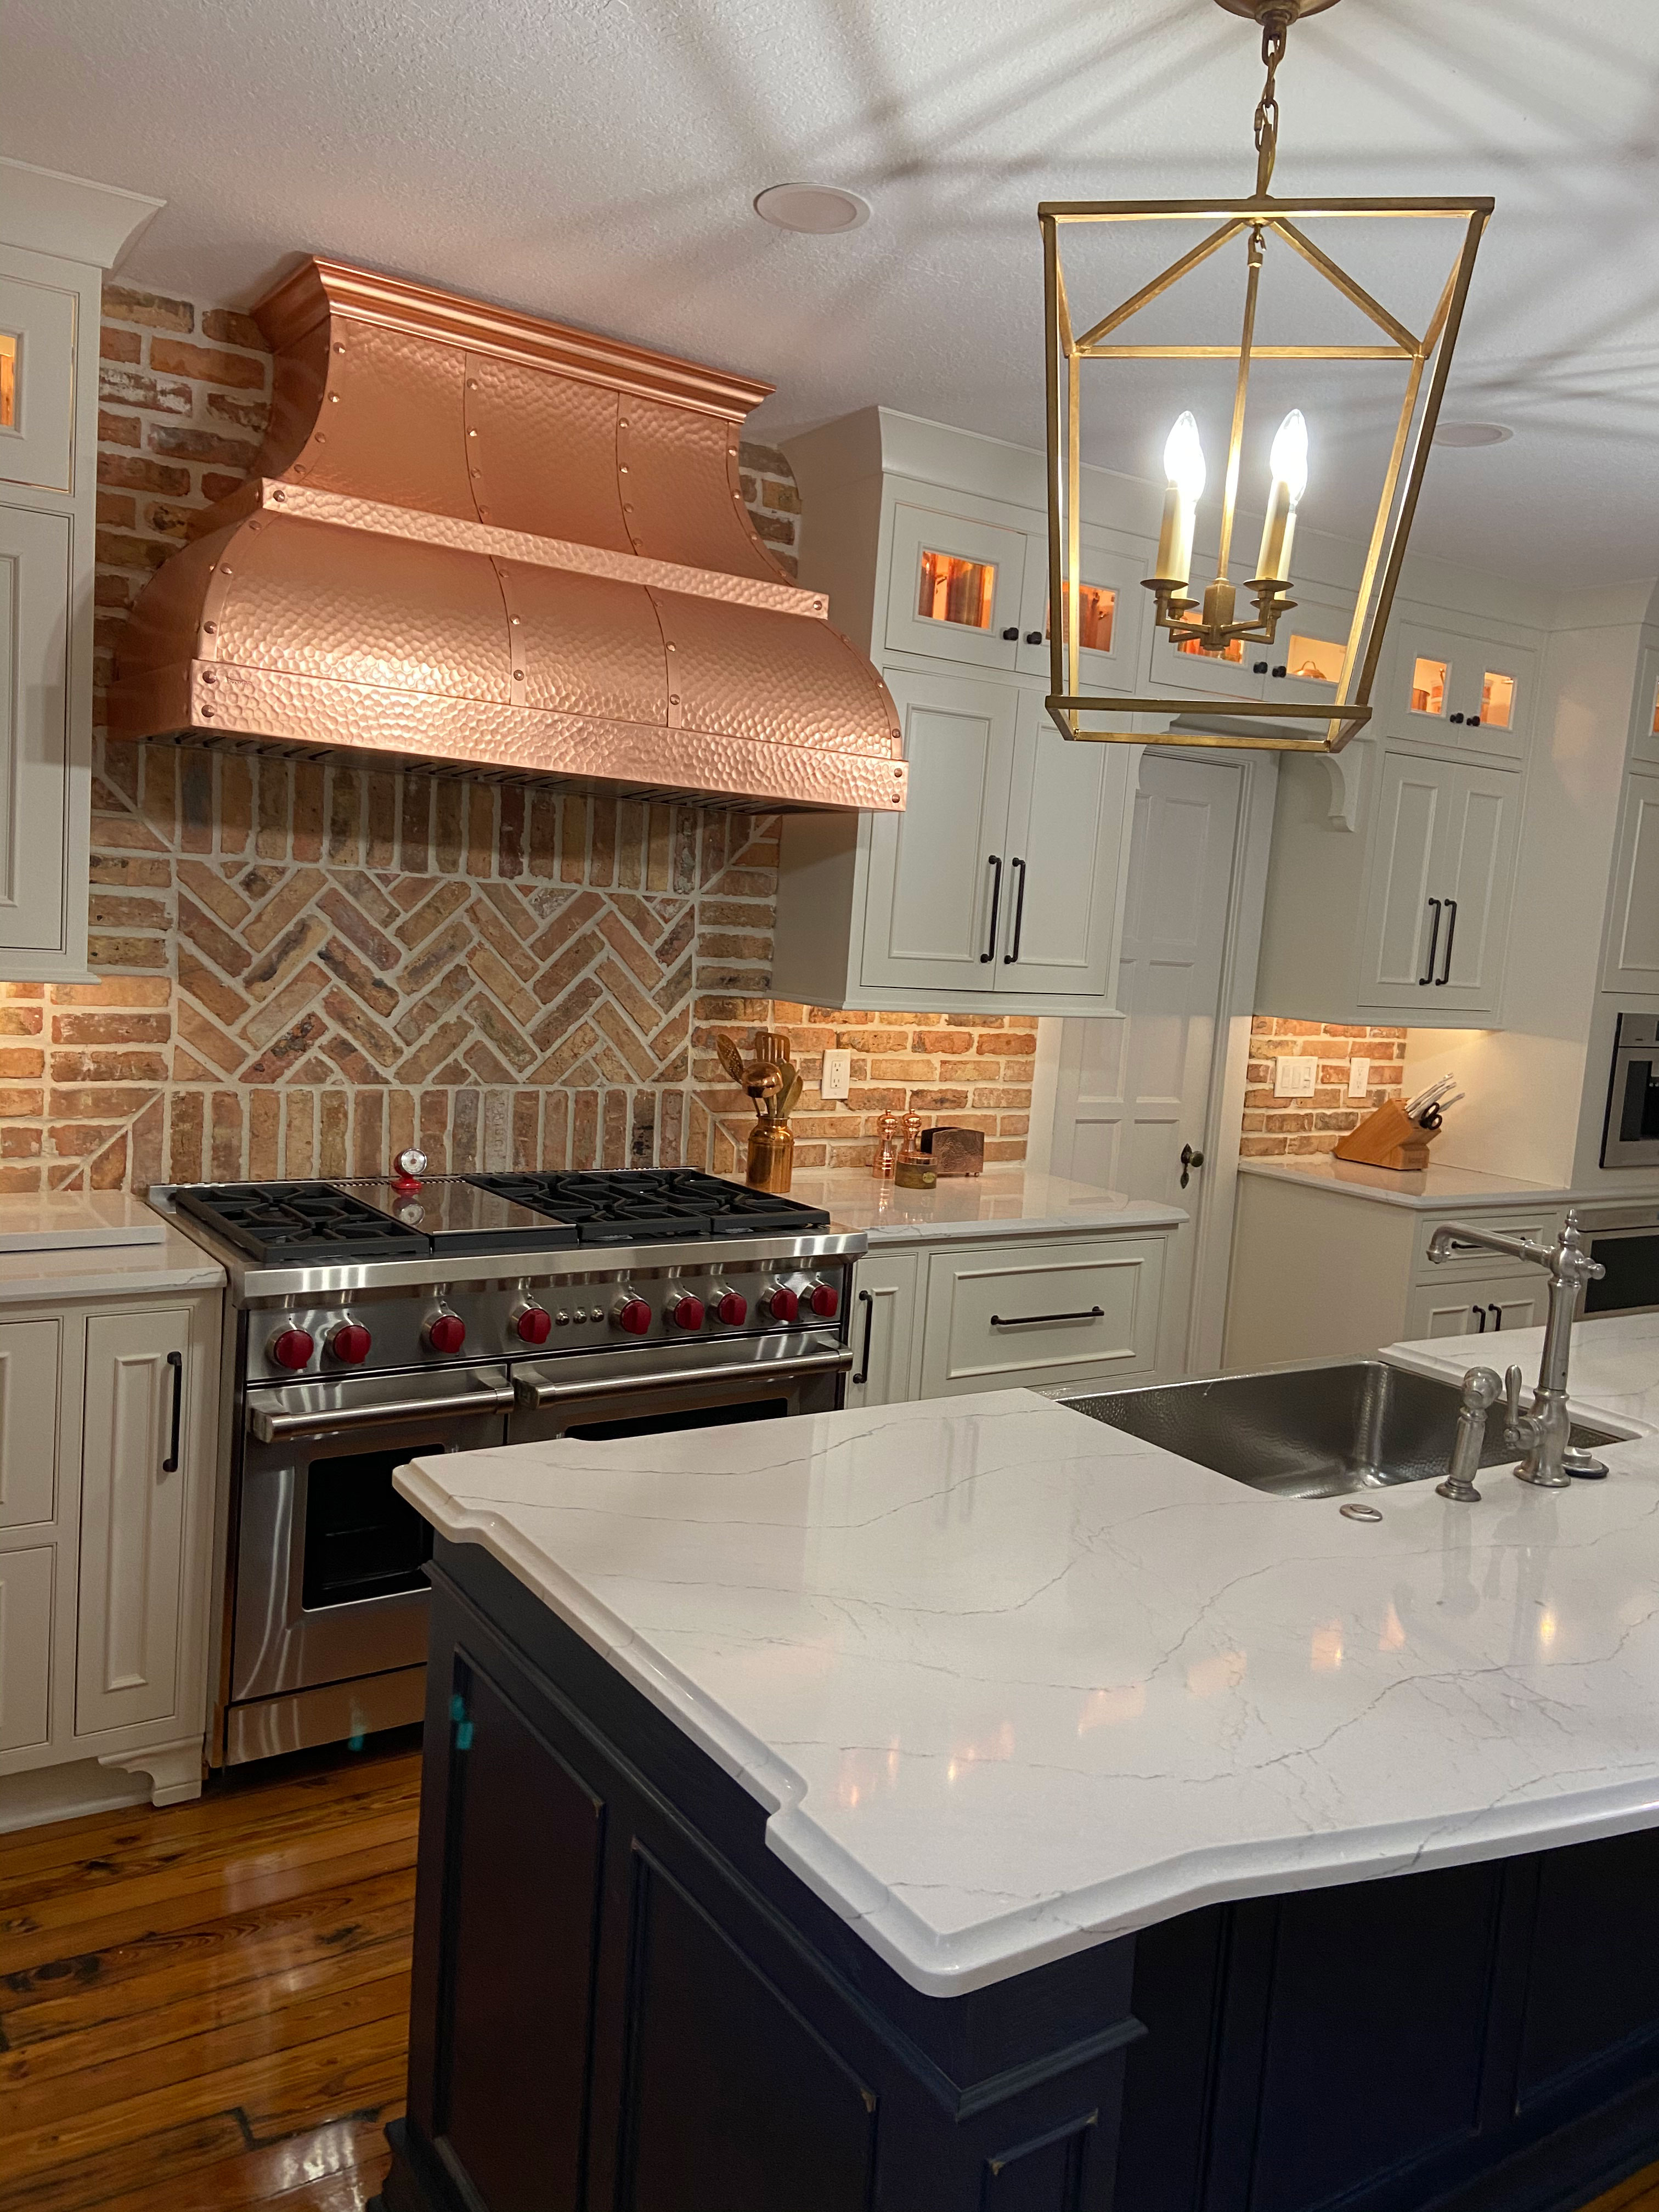 Natural copper range hood in kitchen with exposed brick wall